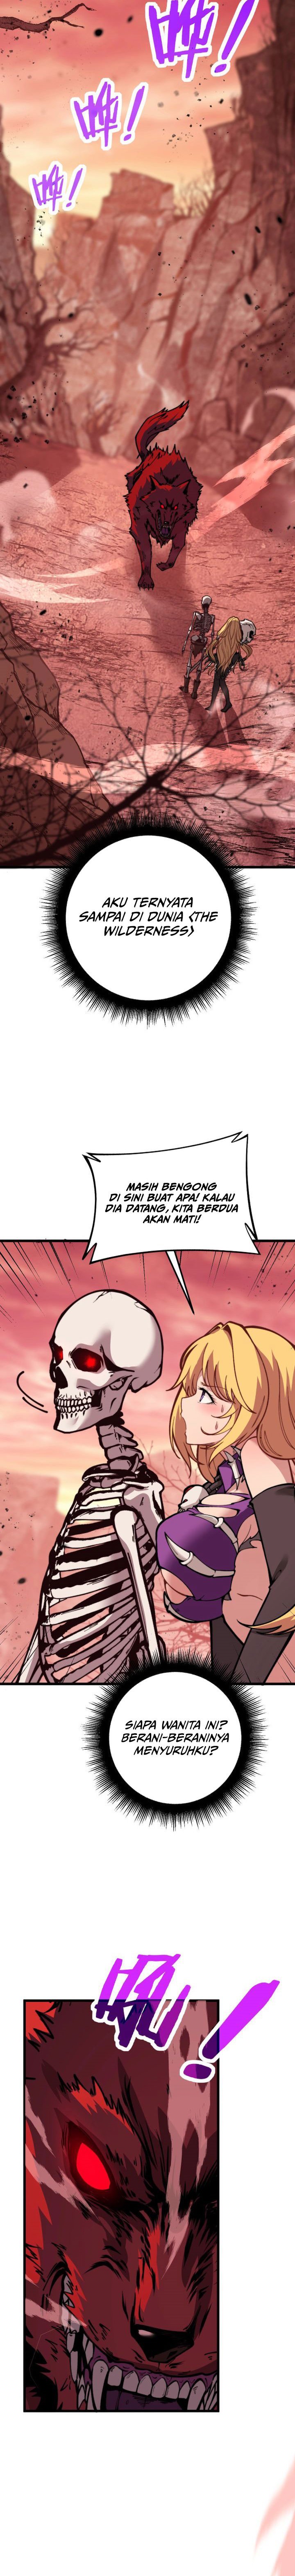 Skeleton Evolution: Starting from Being Summoned by a Goddess Chapter 01